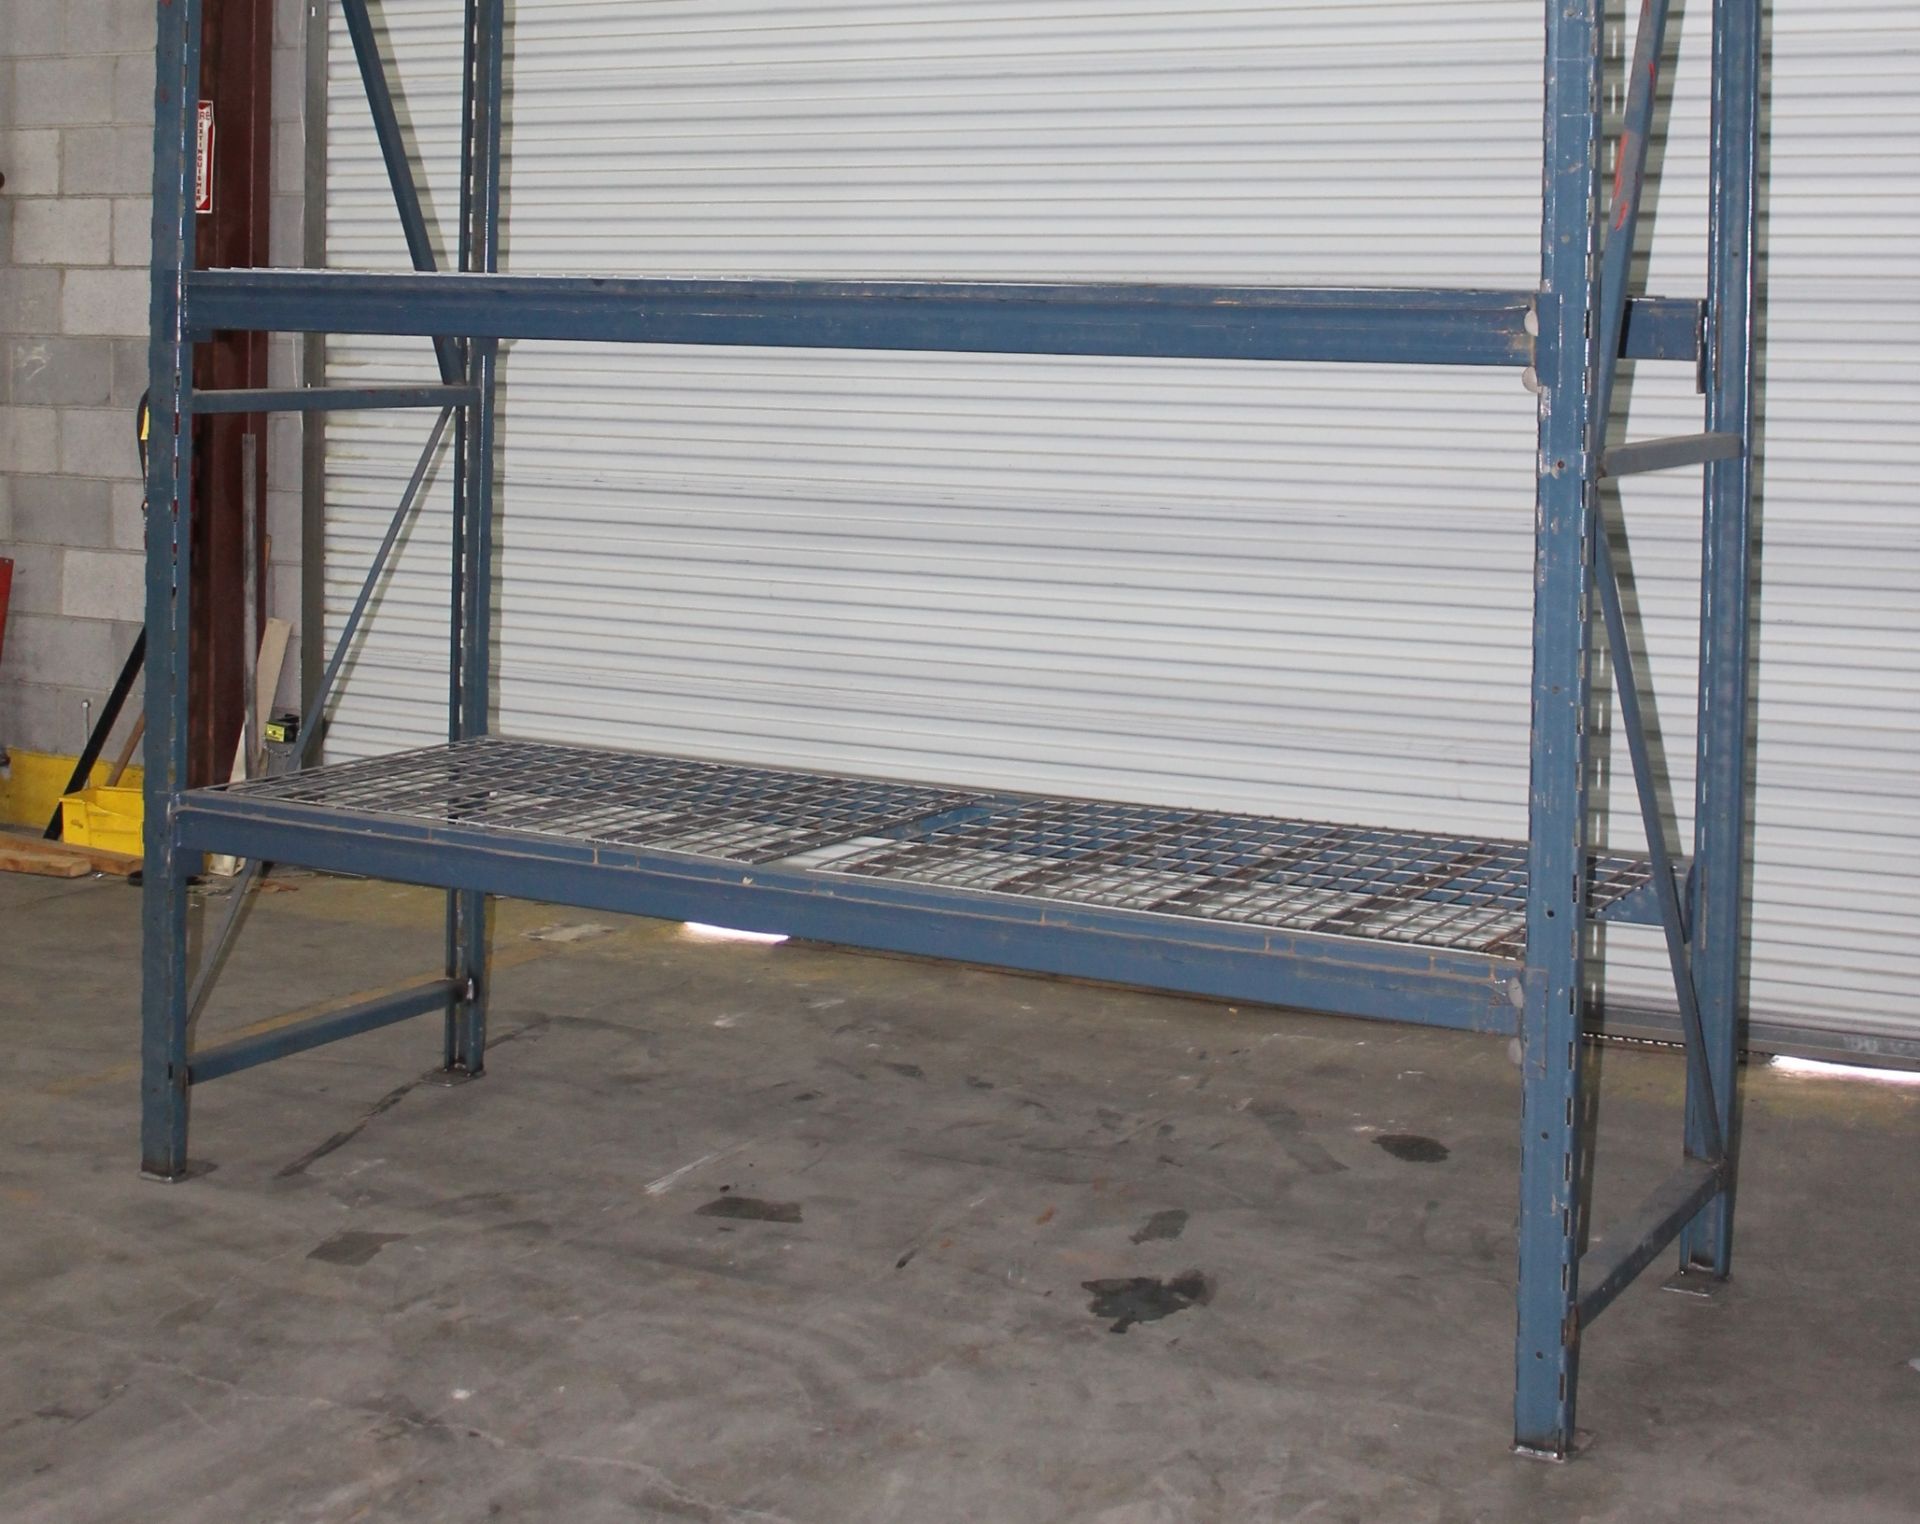 96"H X 36"D X 96"L STOCK ROOM SHELVING, TOTAL 14 SECTIONS WITH 2 BEAM LEVELS EACH,  INCLUDES - Image 2 of 5